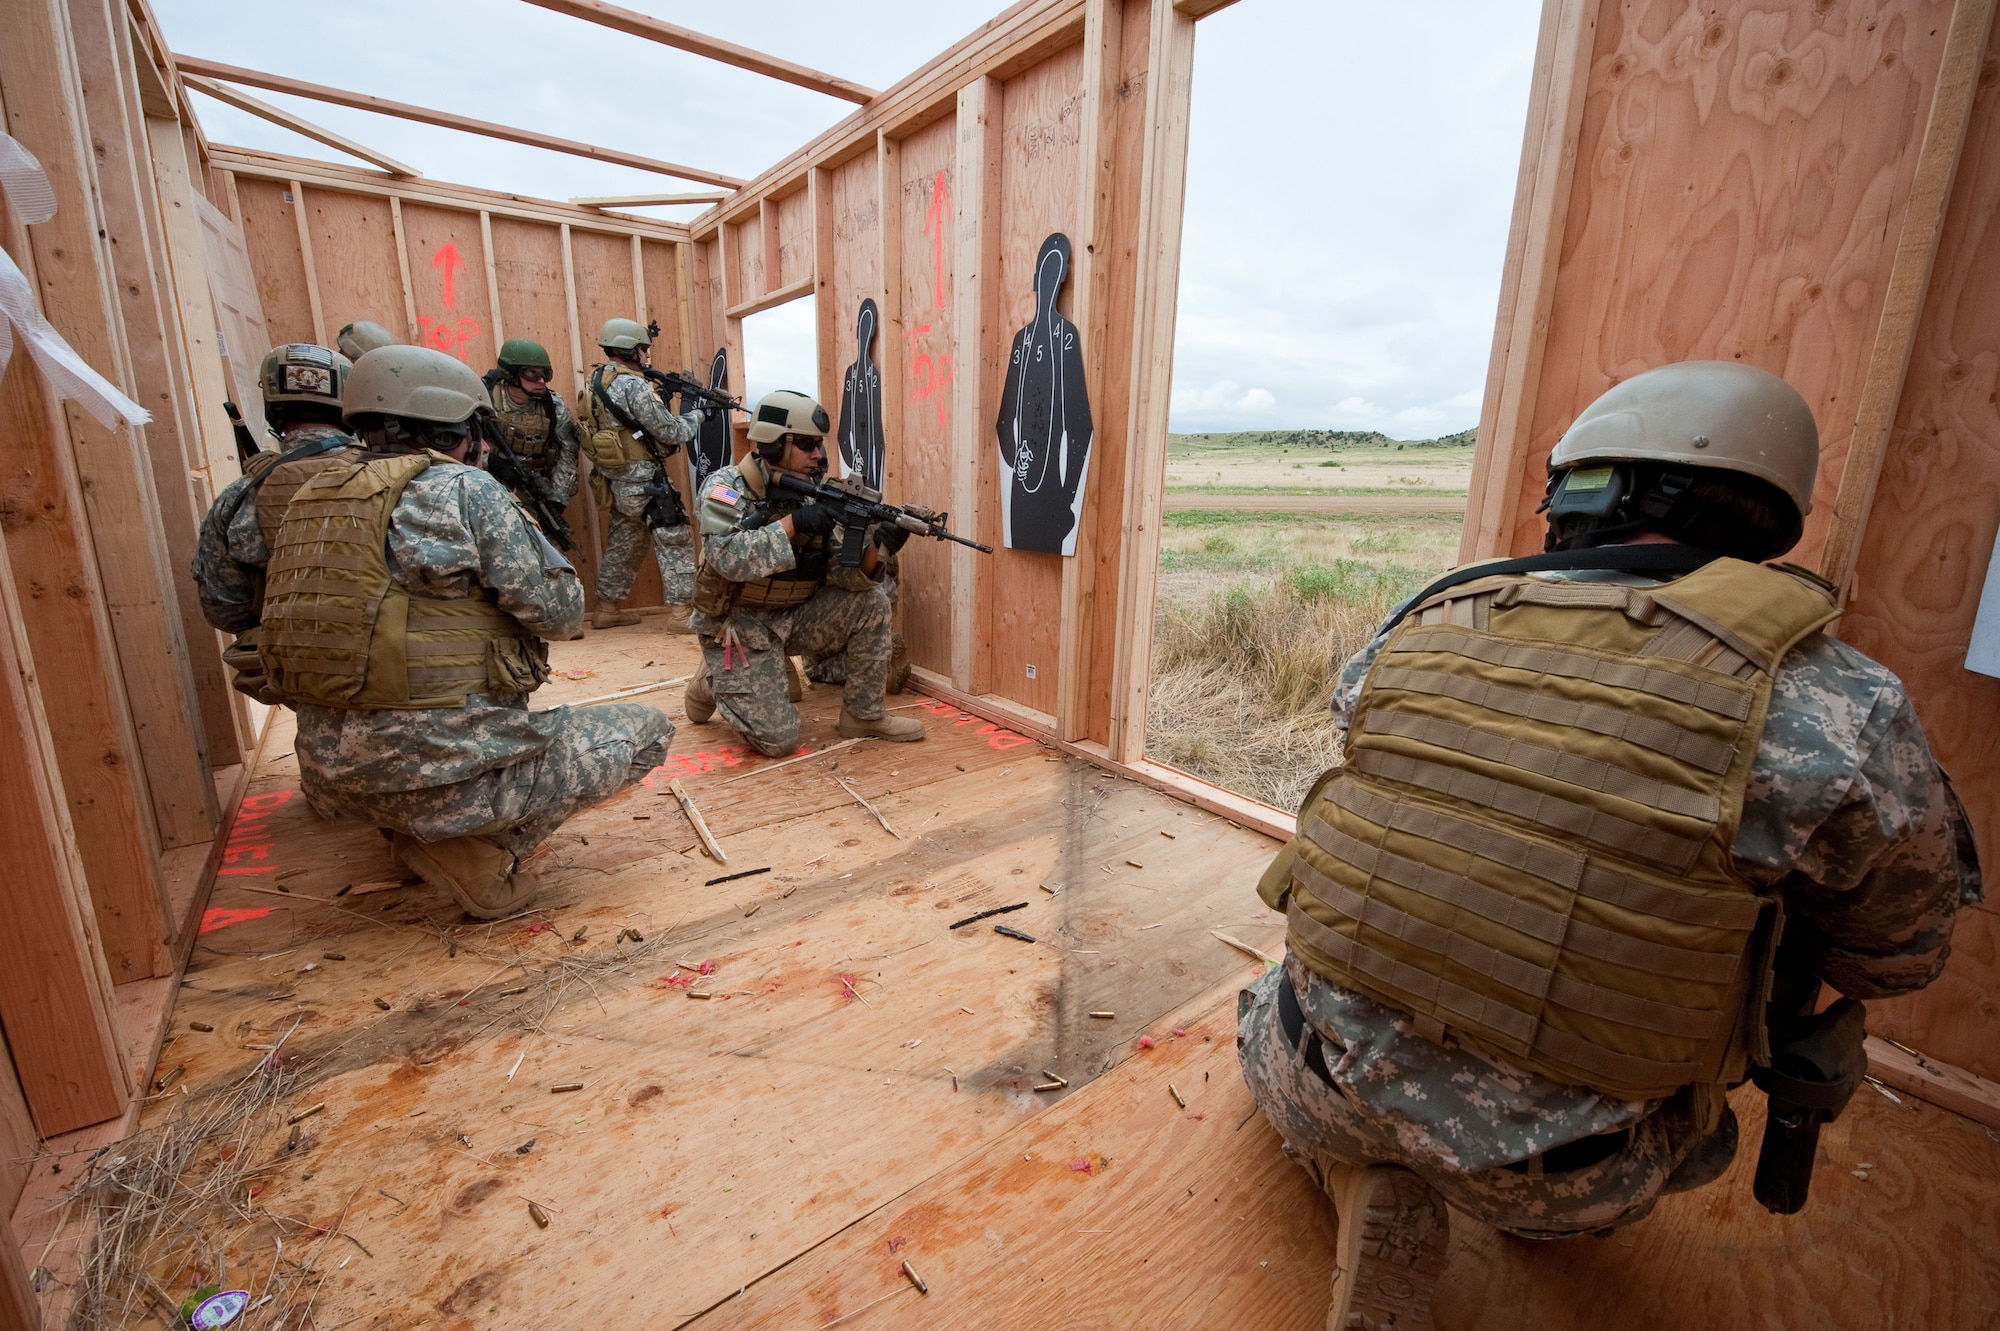 Colorado National Guard's 5th Battalion, 19th Special Forces Soldiers secure a structure while awaiting air extraction during a live fire demonstration at Fort Carson, Colo. June 12, 2010. (U.S. Air Force photo/Master Sgt. John Nimmo, Sr.)